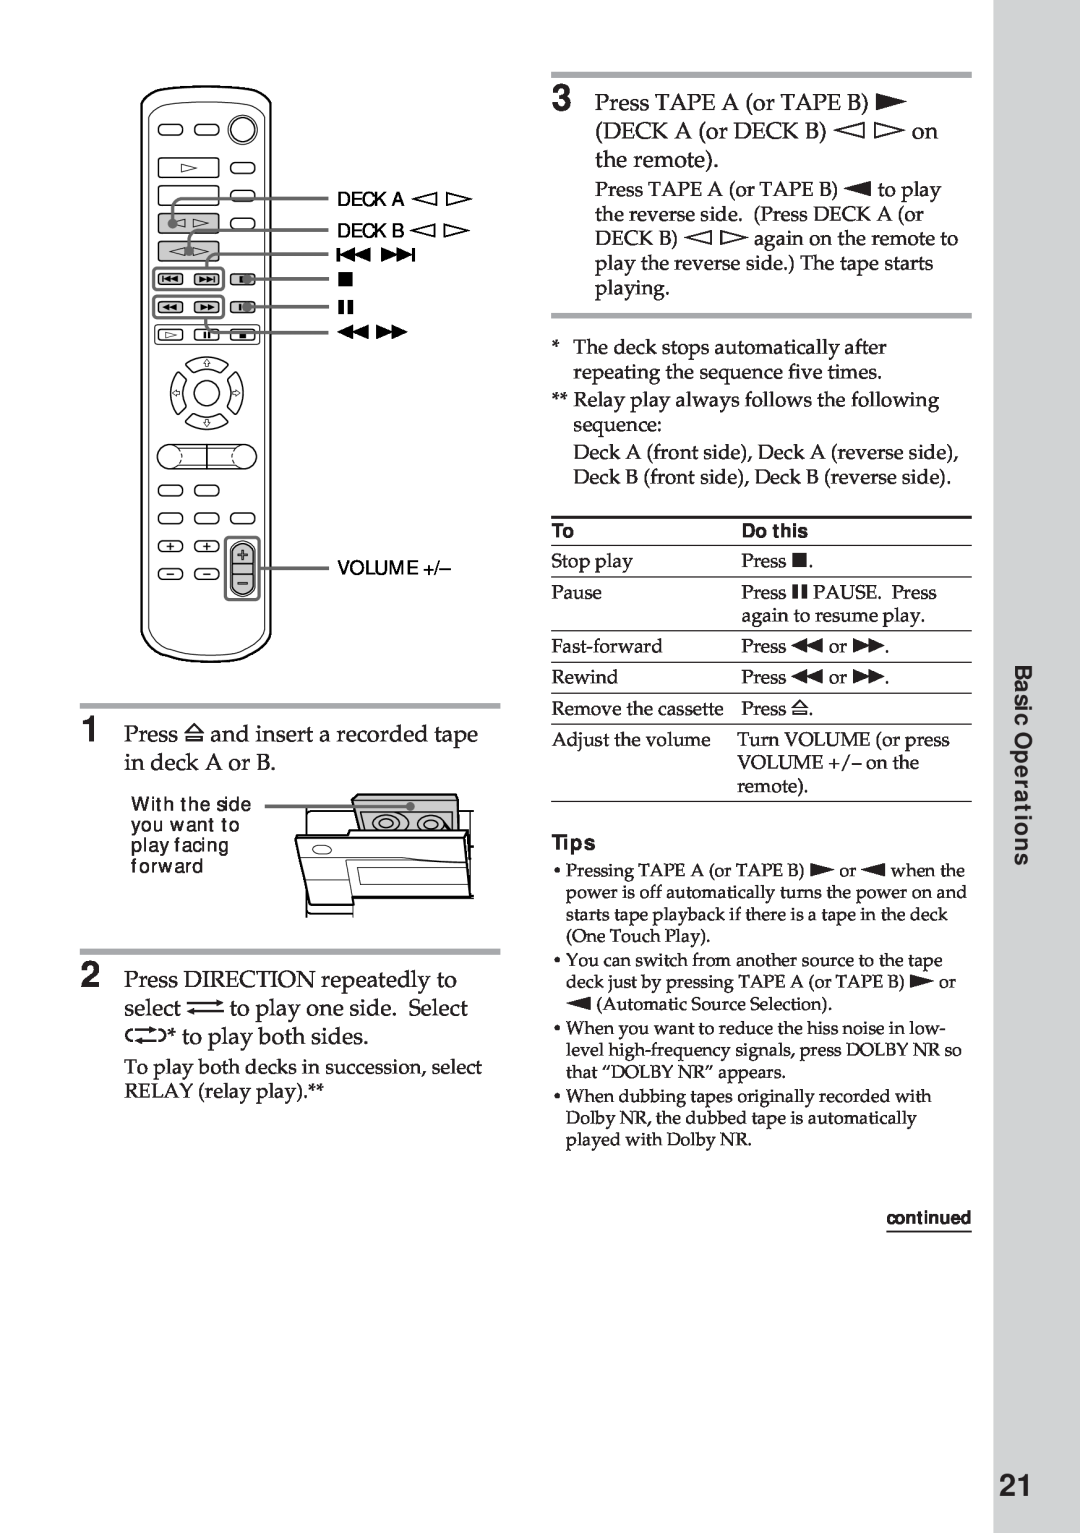 Sony MHC-GRX10AV operating instructions Basic Operations, Relay play always follows the following sequence 